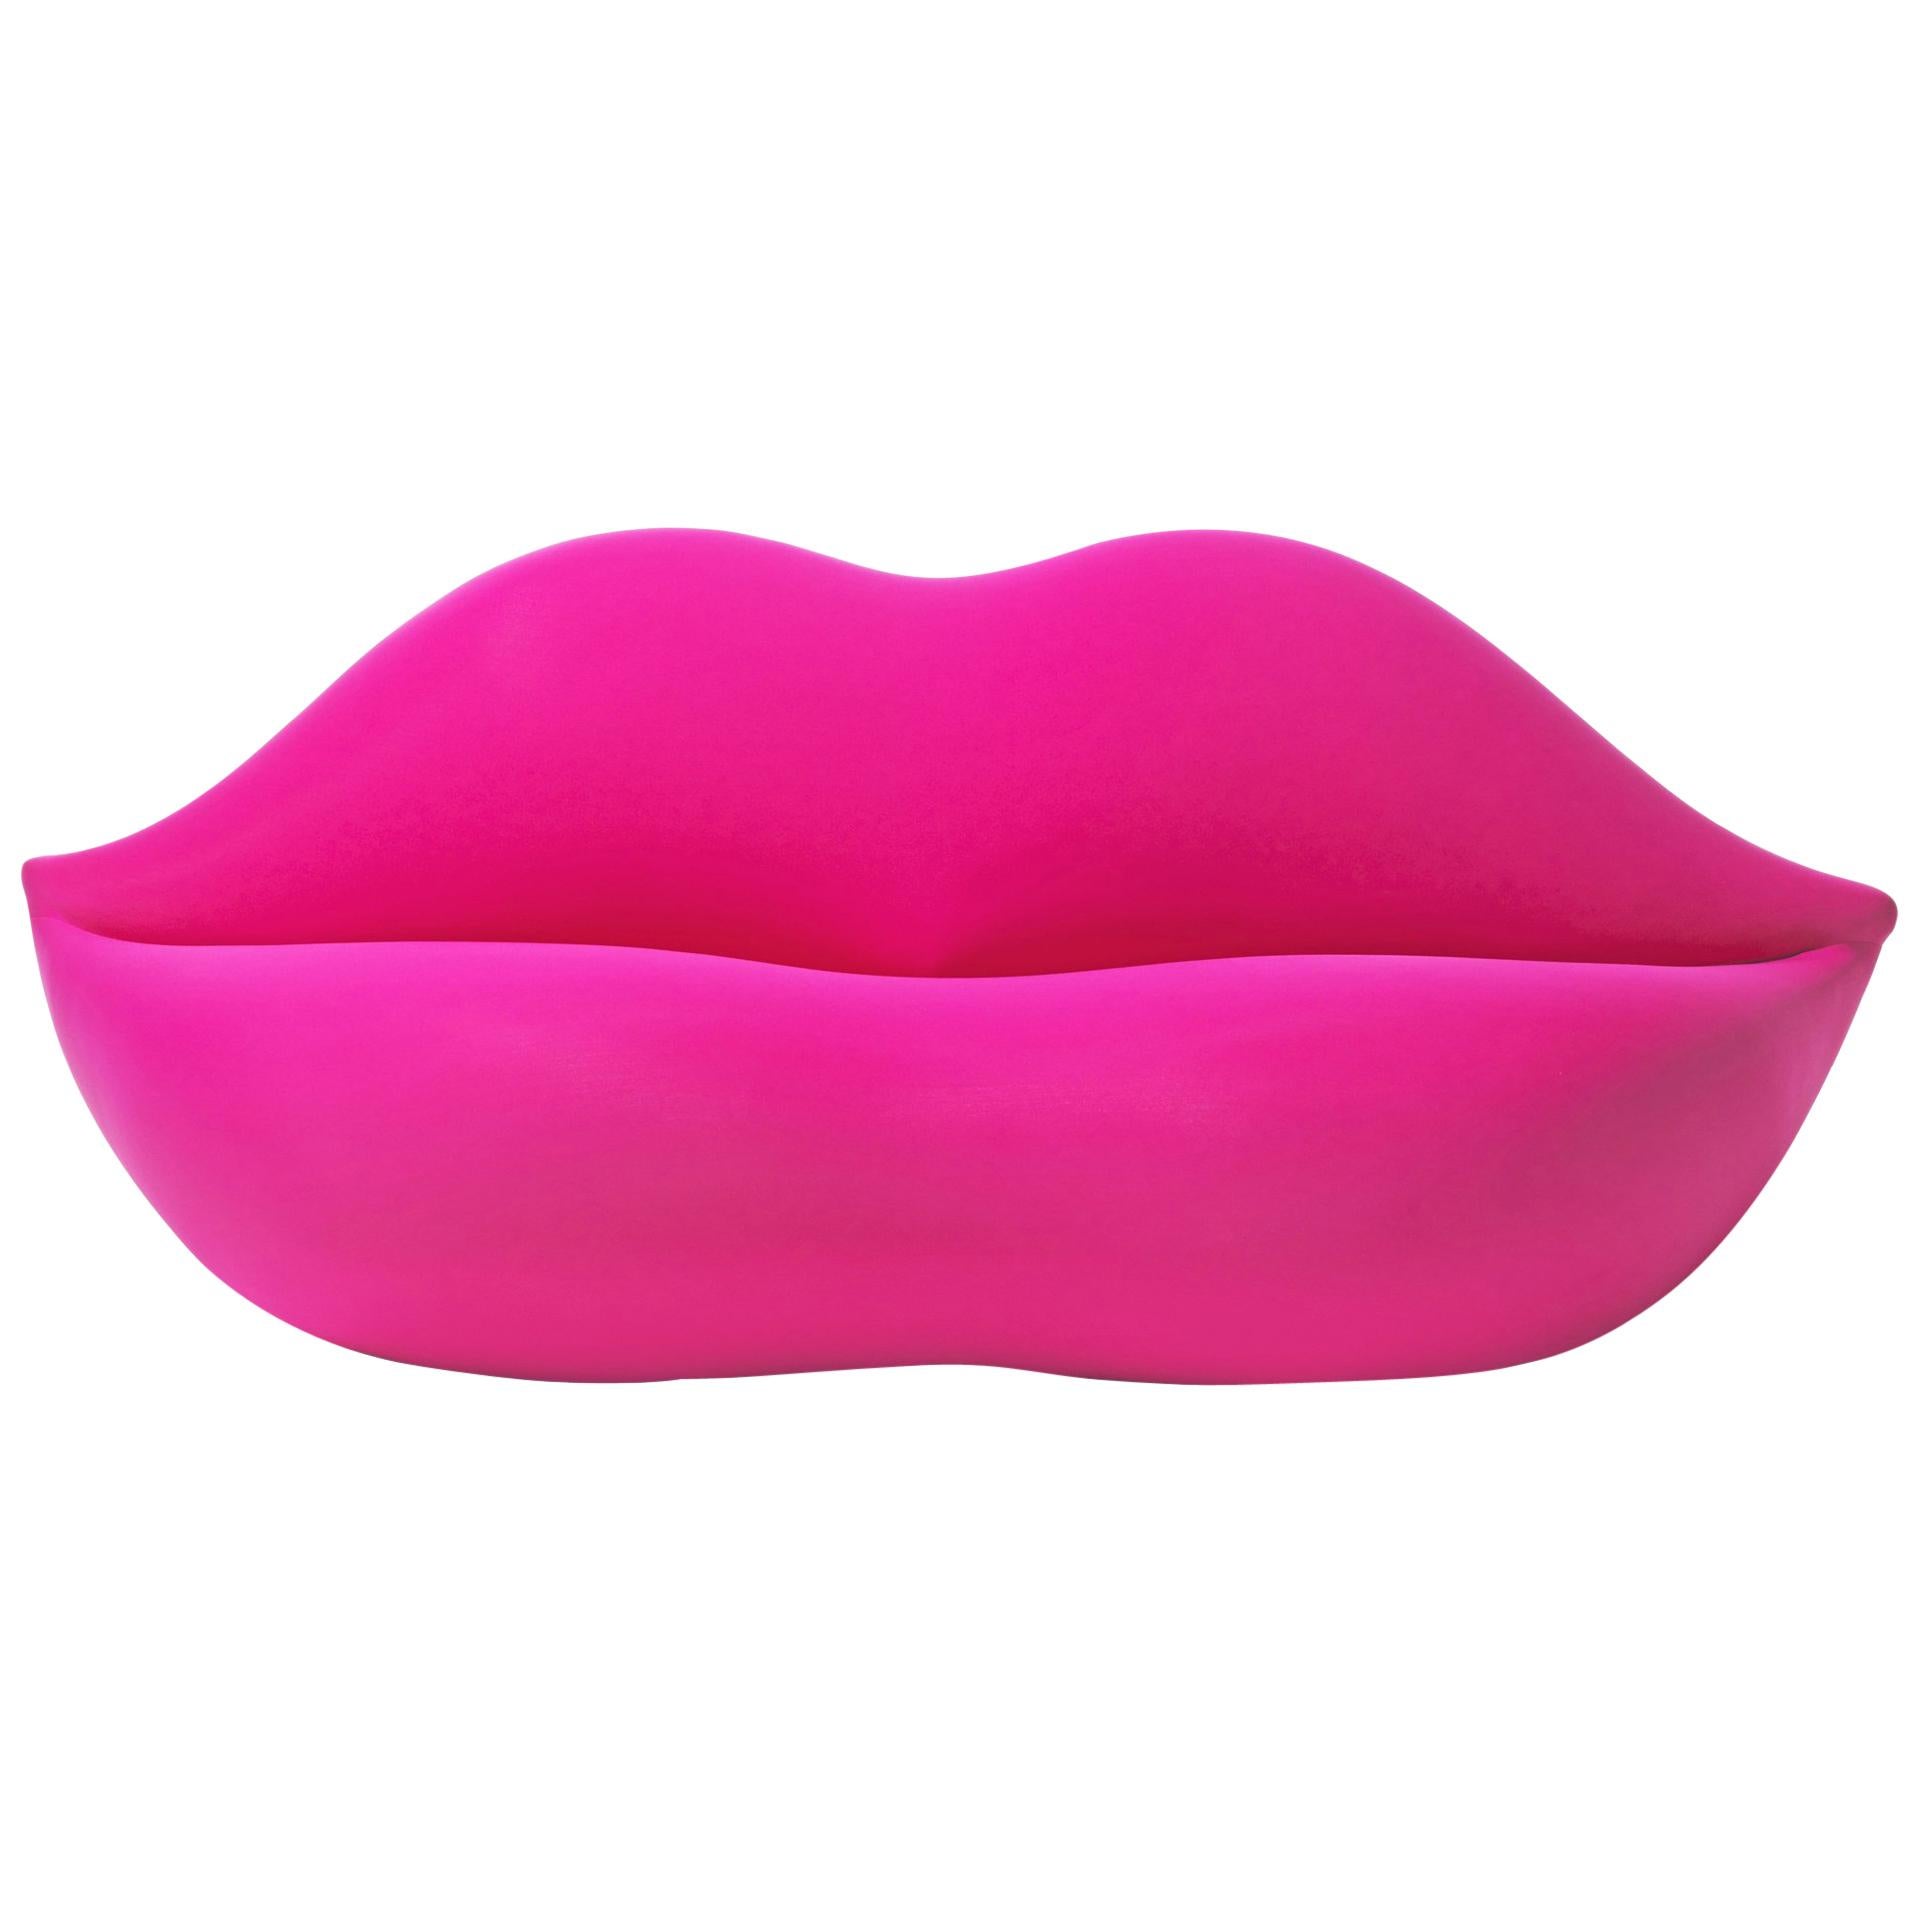 GUFRAM Pink Lady Couch by Studio 65